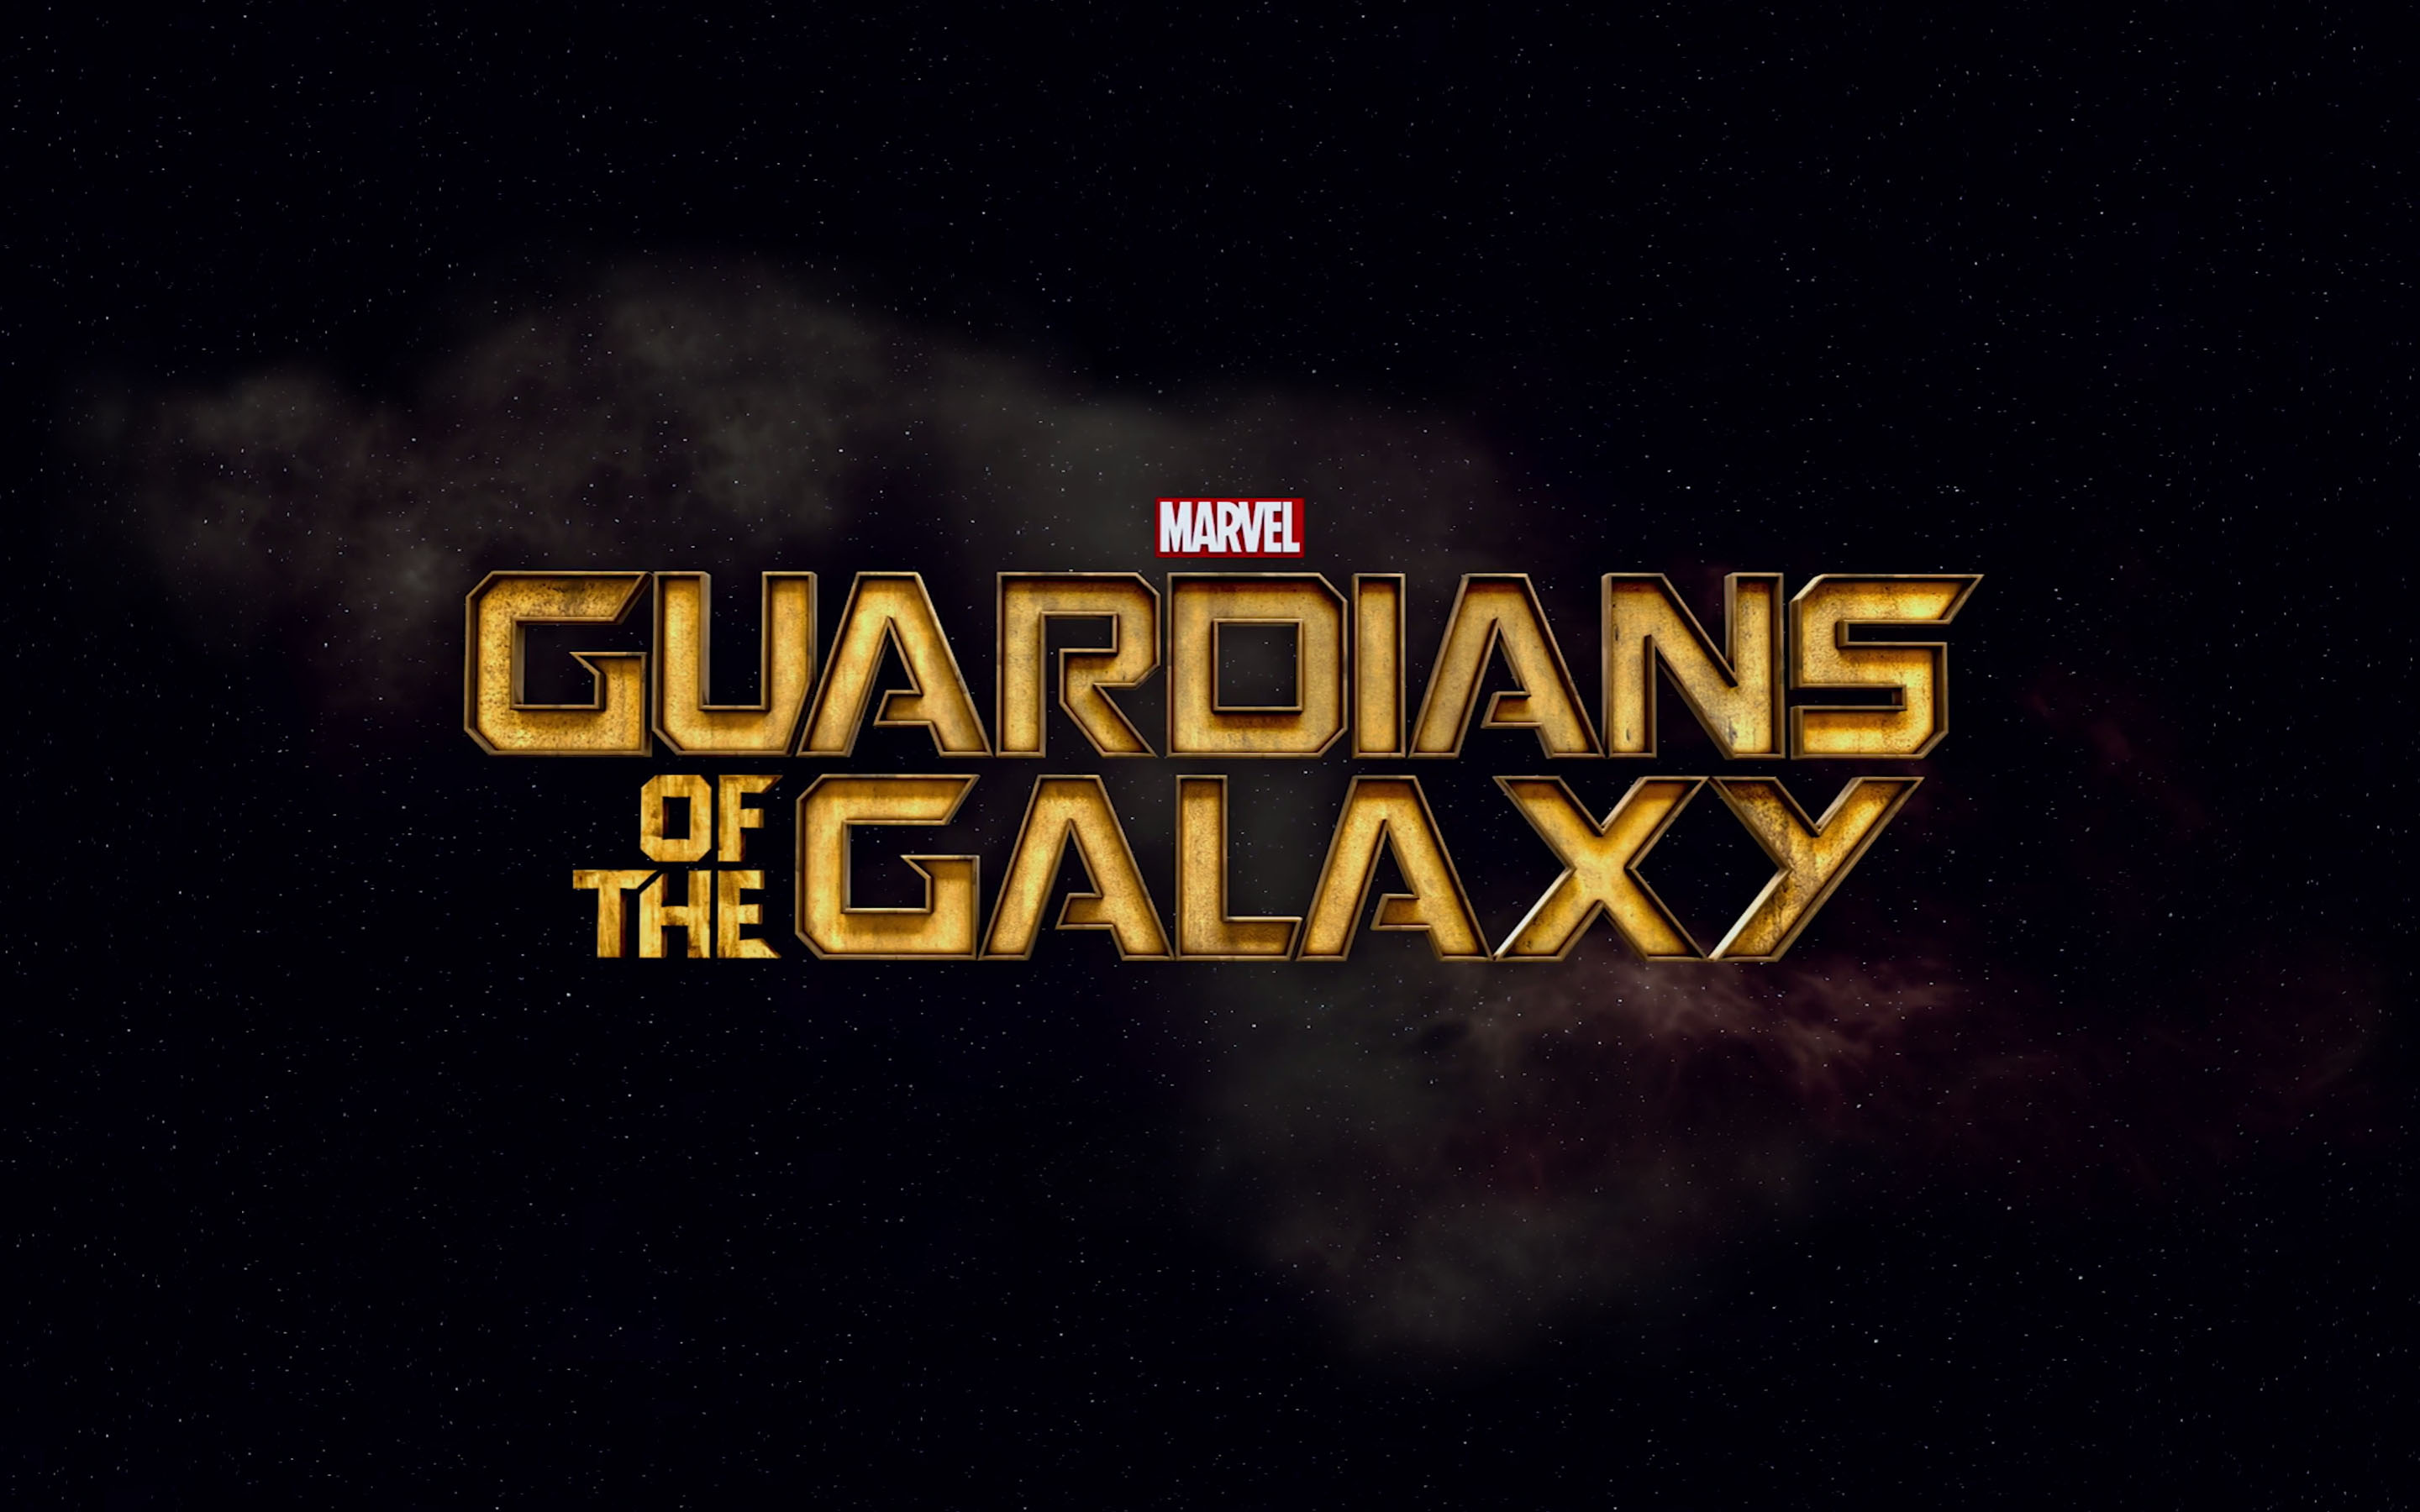 Guardians of the galaxy wallpaper